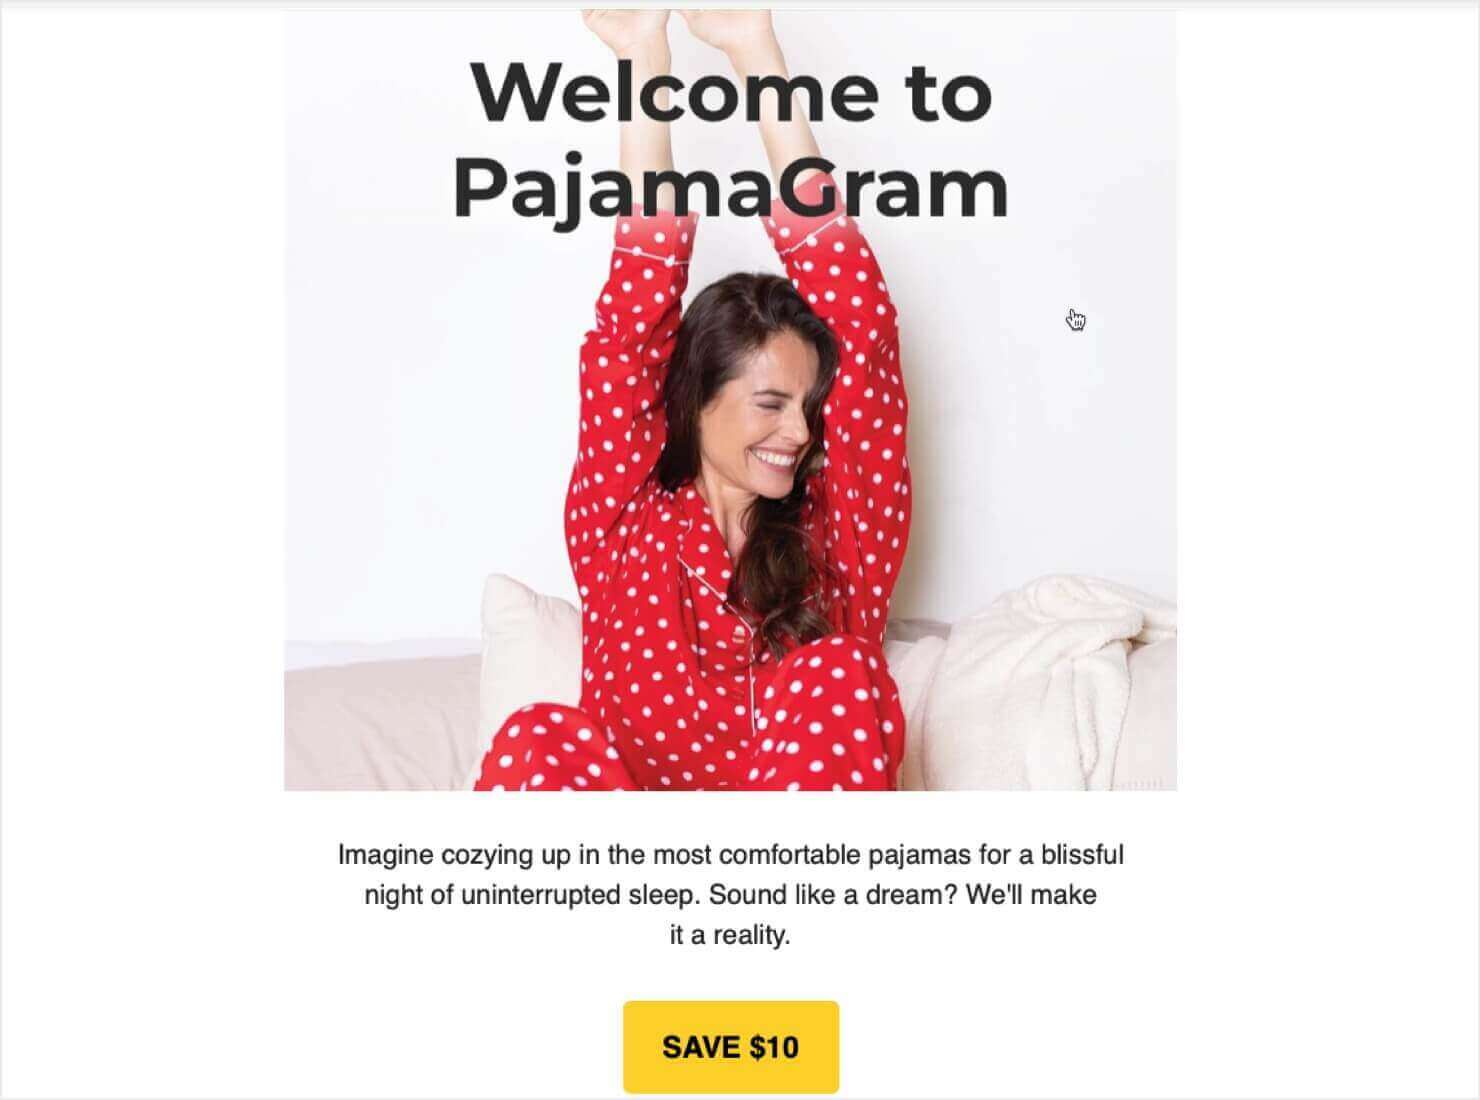 Welcome email with a photo of a happy woman wearing pajamas. Heading says "Welcome to PajamaGram." Body text says, "Imagine cozying up in the most comfortable pajamas for a blissful night of uninterrupted sleep. Sound like a dream? We'll make it a reality." Call to Action button says "Save $10" 